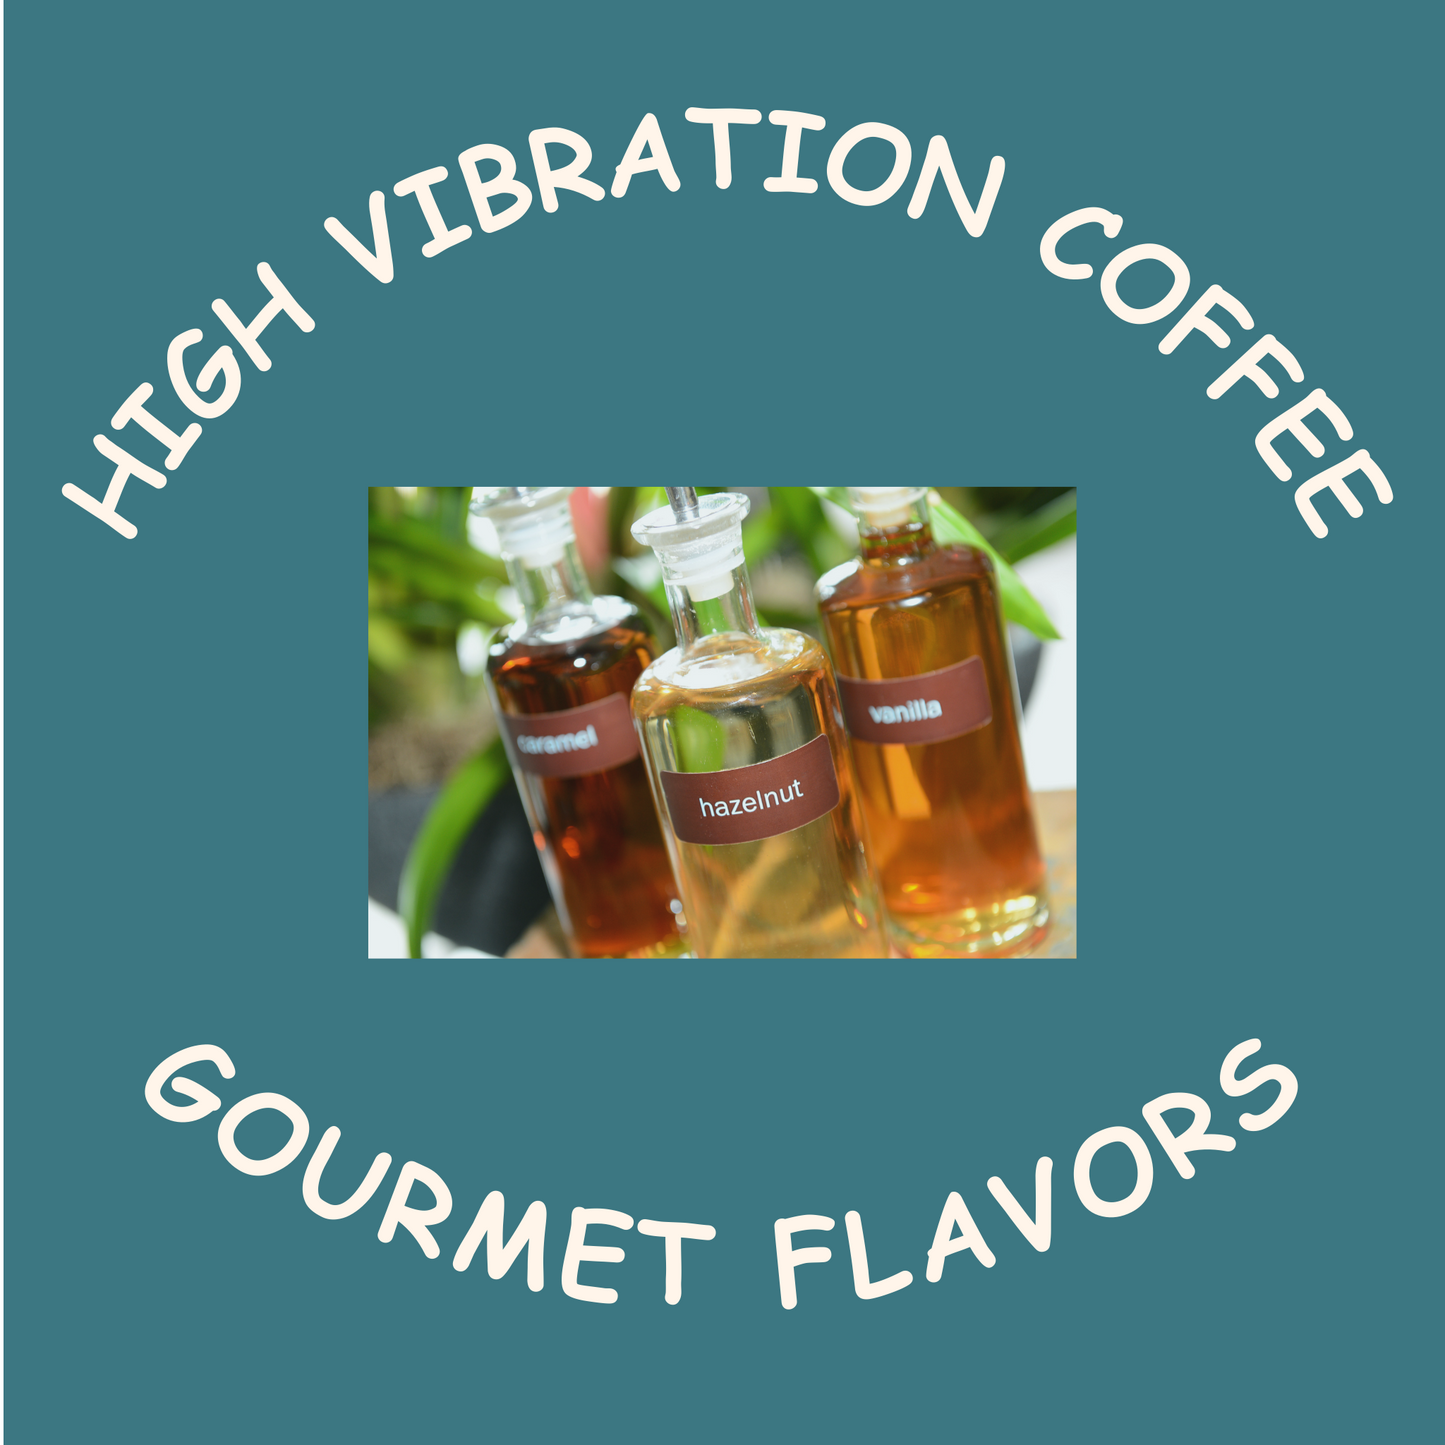 High Vibration Coffee - Collection of Handcrafted Blends